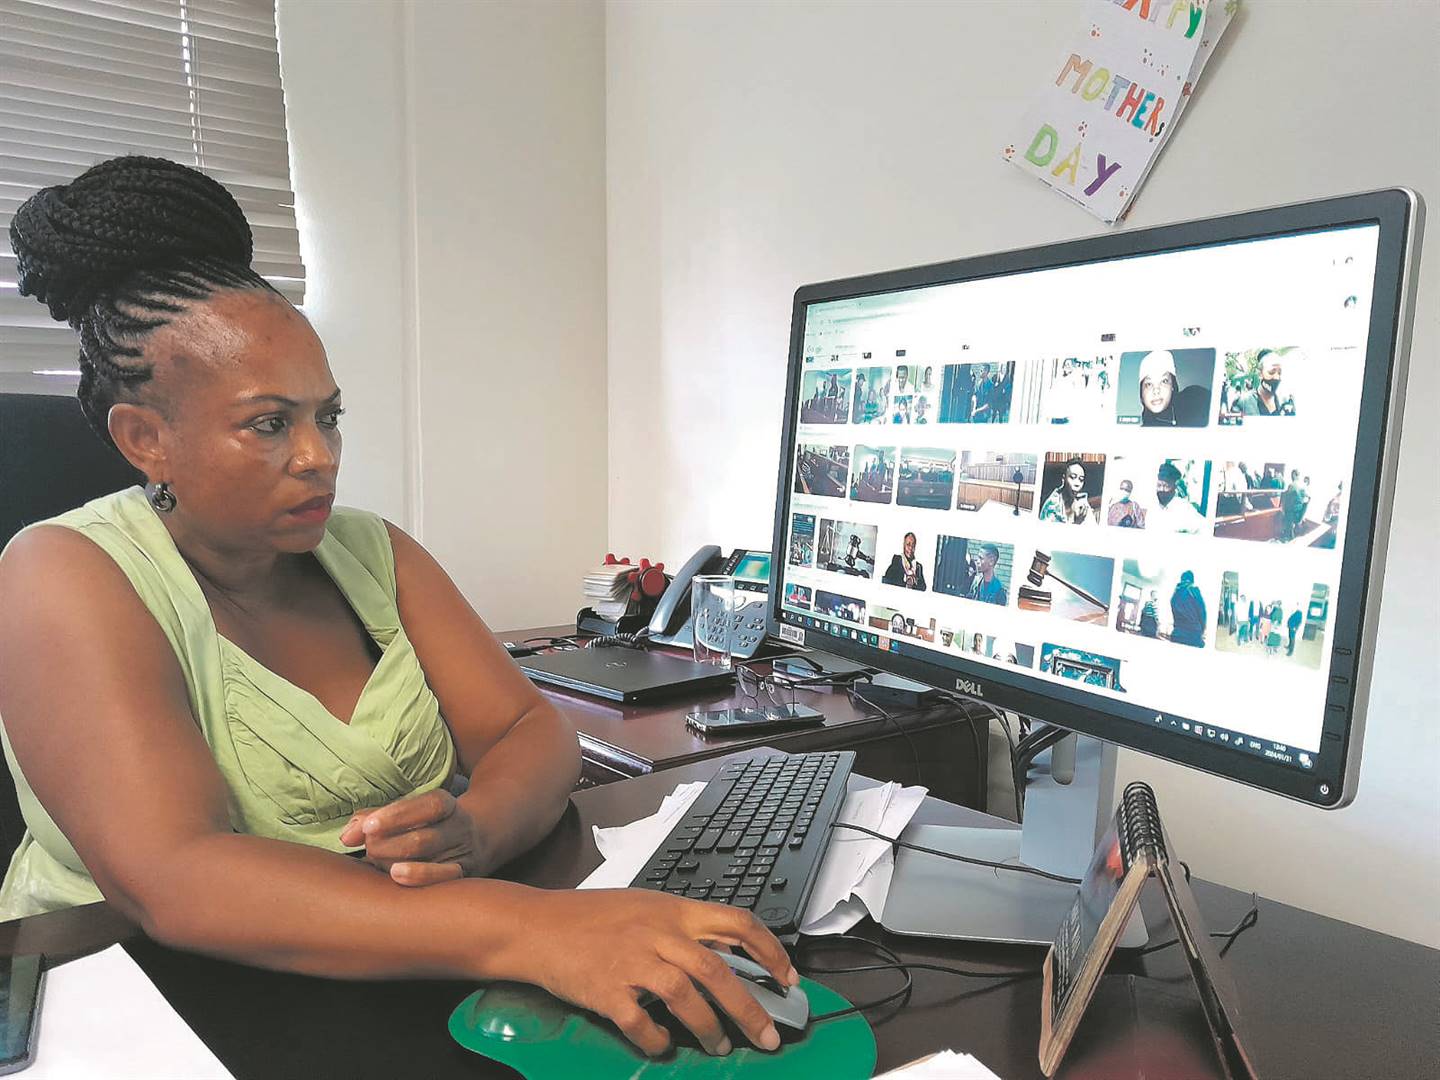 Onthatile Sebati’s paternal aunt, Poppy Sebati, browsing through the online pictures of her niece’s court proceedings